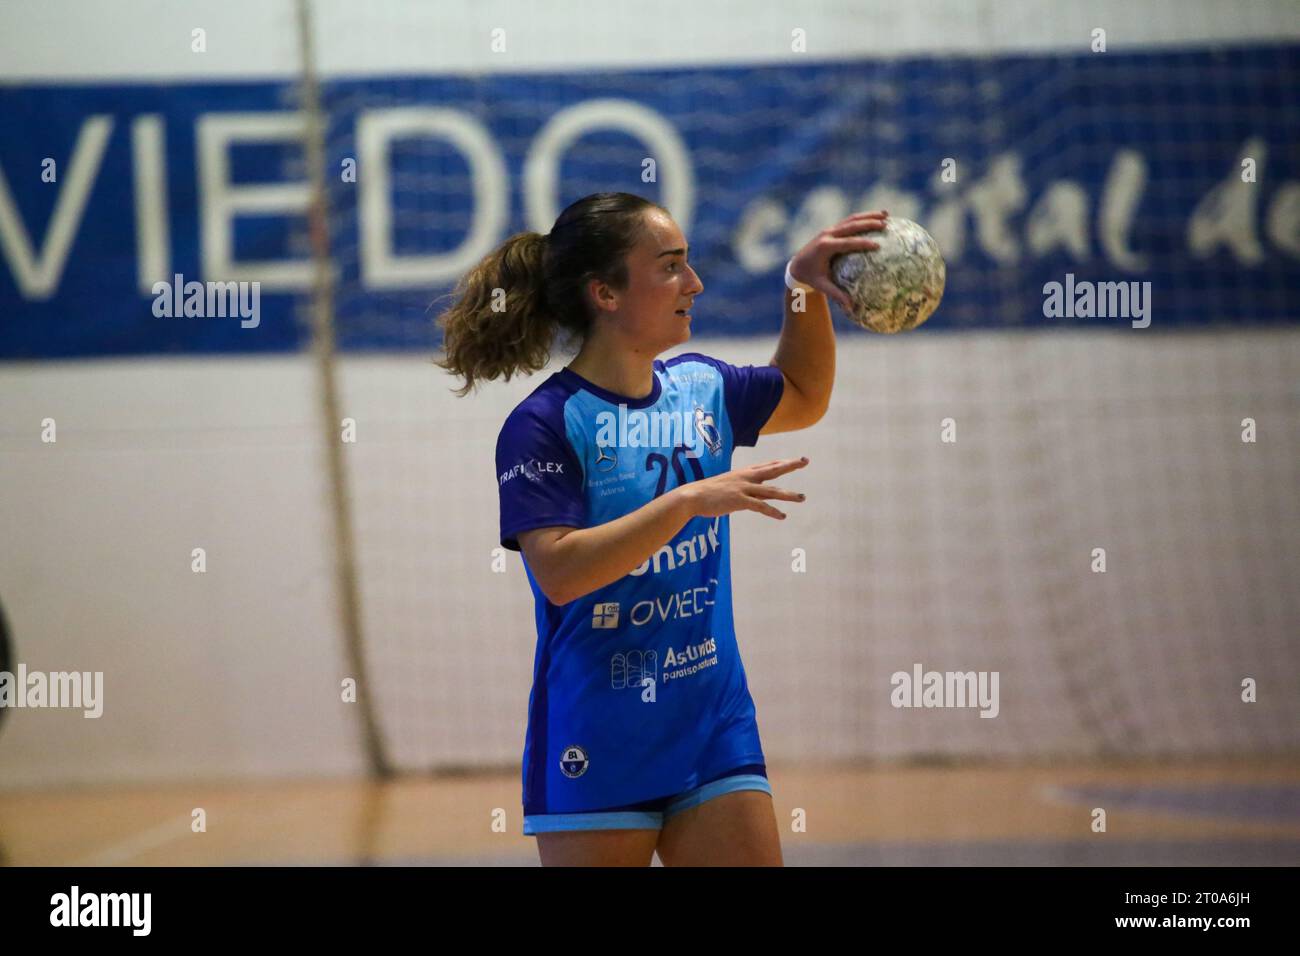 Carmen garcia hi-res stock photography and images - Alamy